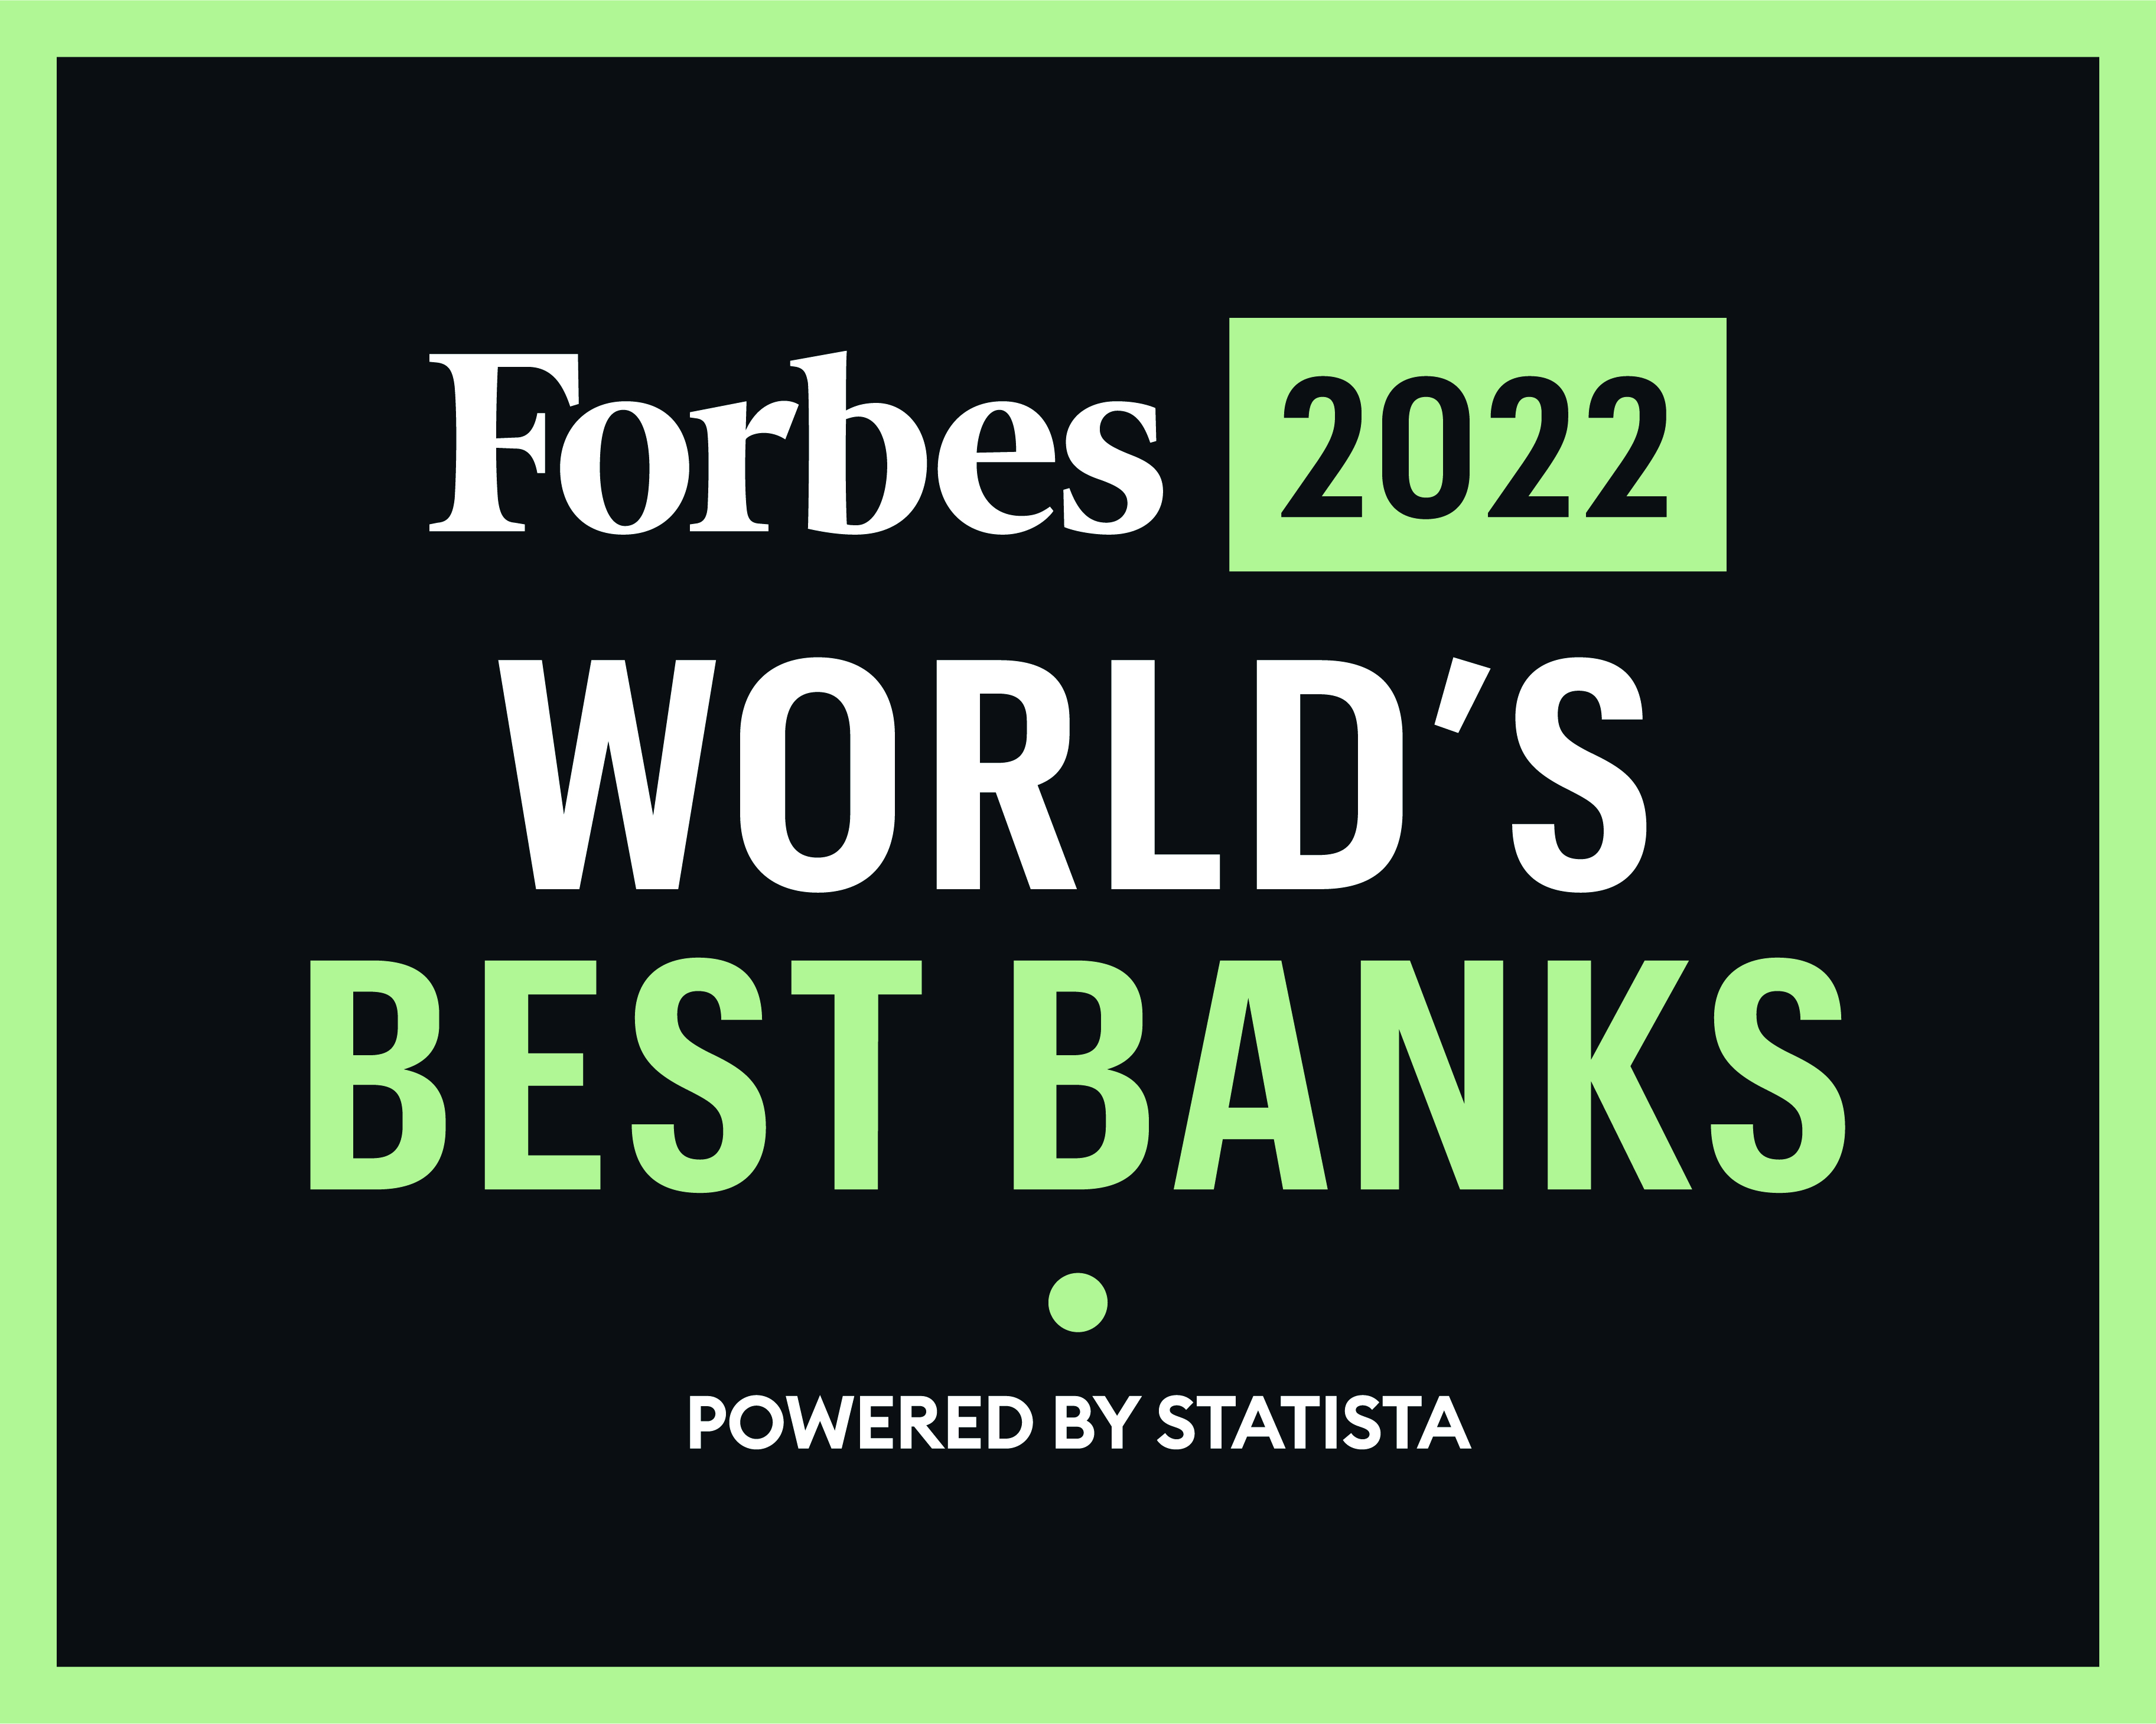 Forbes 2022 World's Best Banks